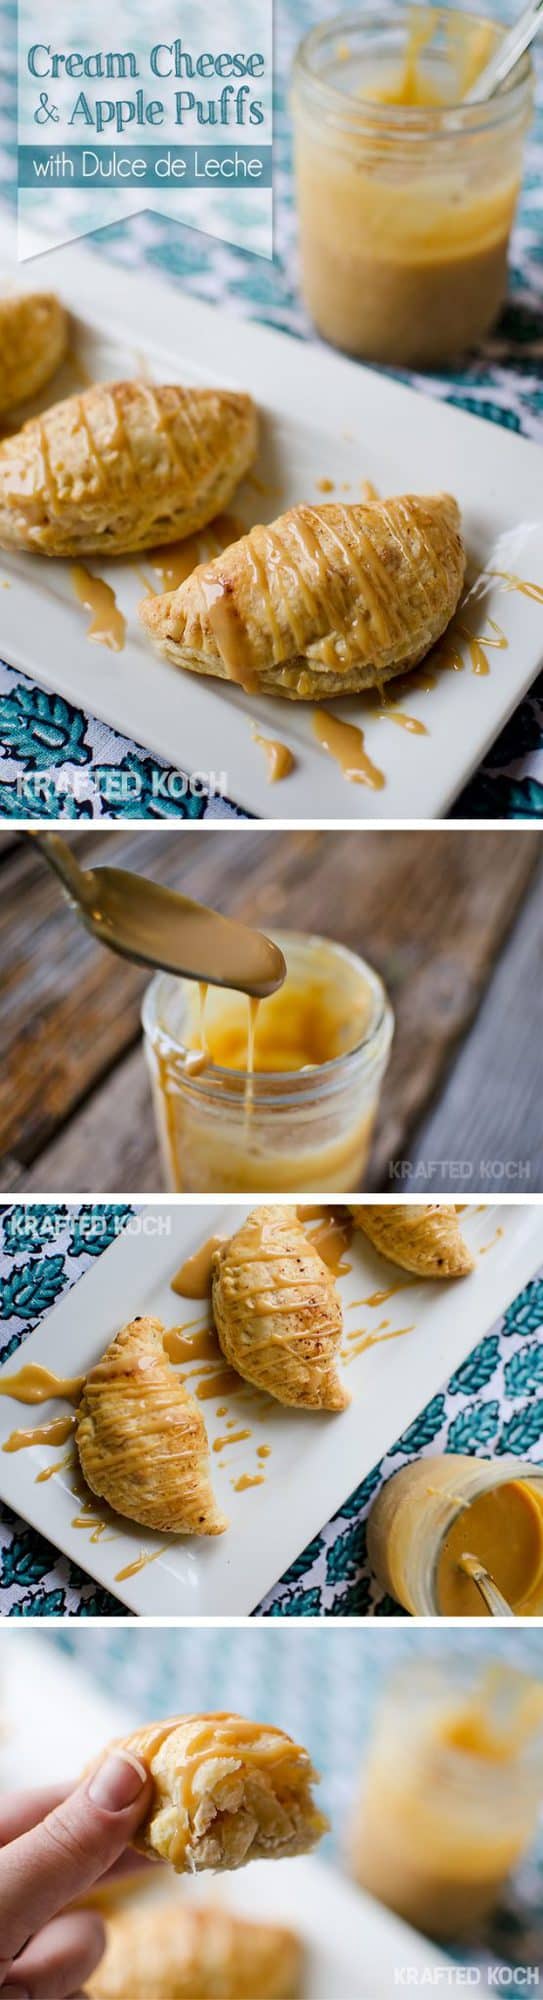 Apple & Cream Cheese Puffs with a Dulce de Leche drizzle - Krafted Koch - A fantastic fall appetizer!